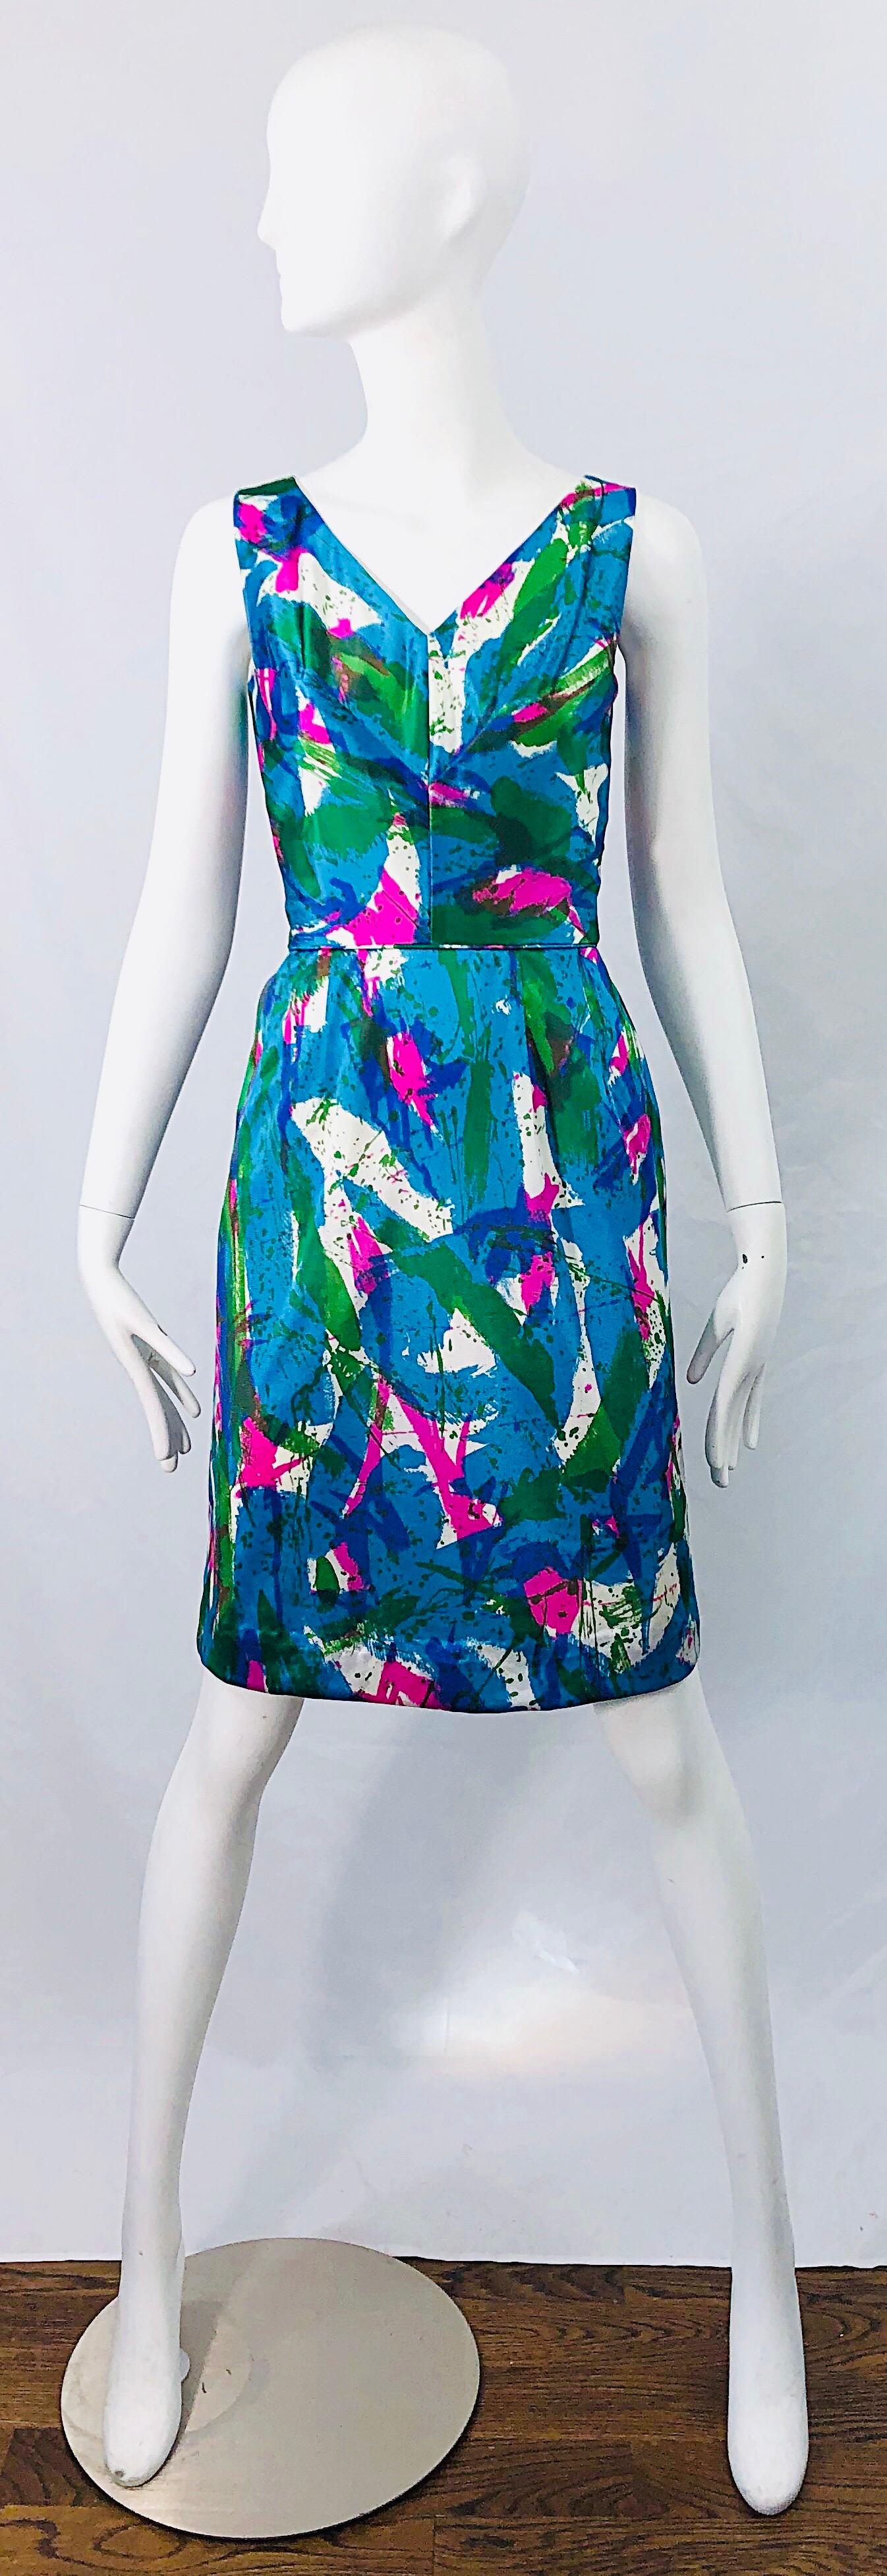 Chic 1960s Neon Abstract Print Two Piece Vintage 60s Sheath Dress + Top Blouse  For Sale 4